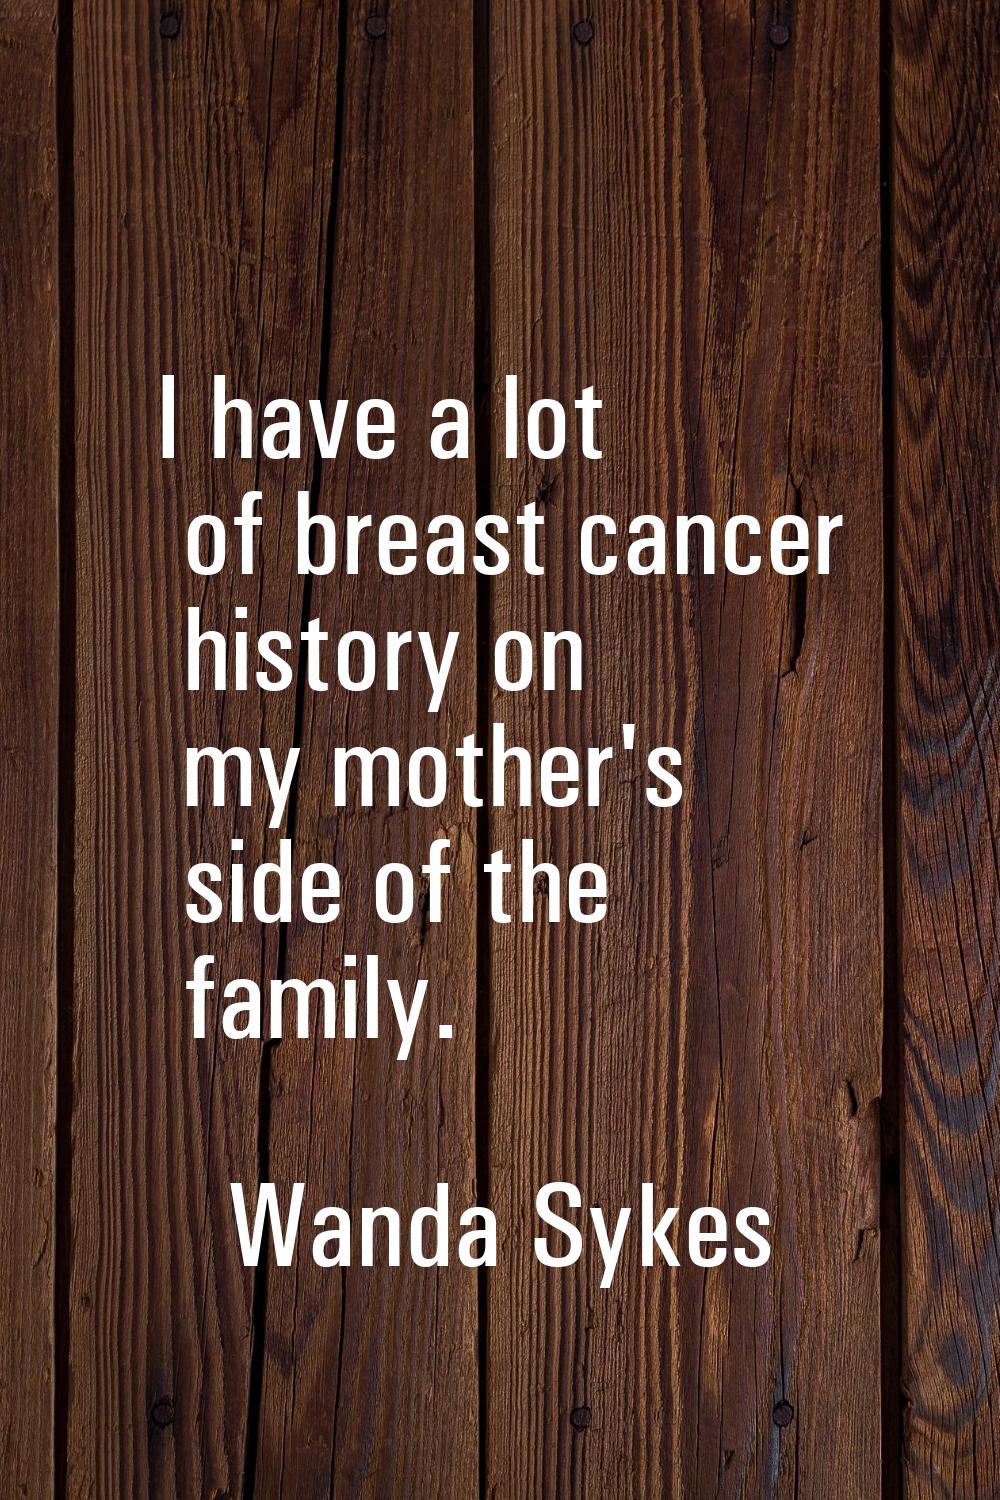 I have a lot of breast cancer history on my mother's side of the family.